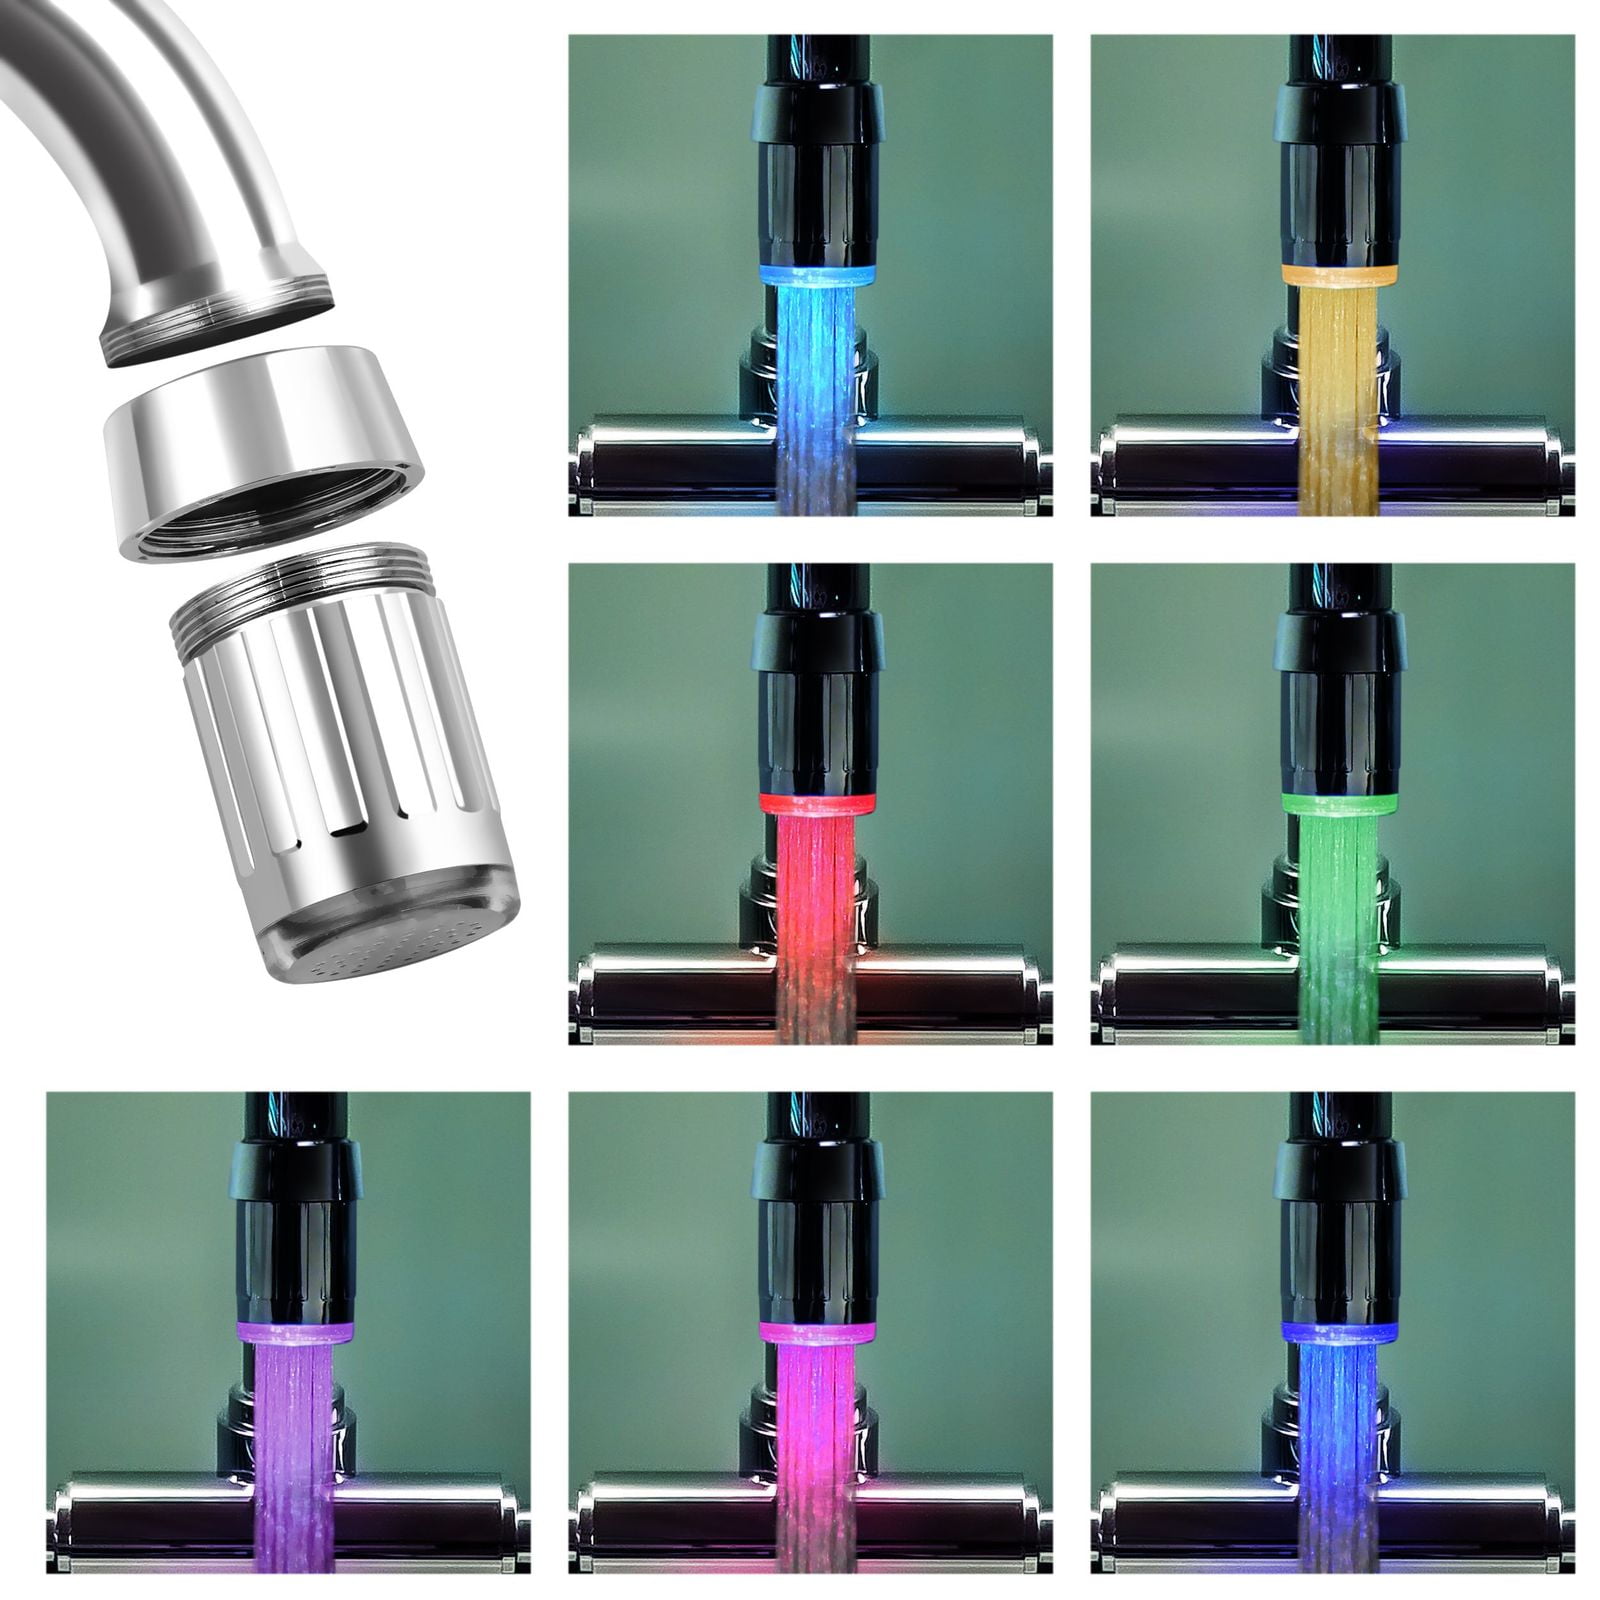 Lamcomt Childrens Faucet Extender 7 Color Water Faucet Stream Light Waterfall Glow Shower Stream Tap Head Pressure Sensor Kitchen Bathroom Temperature Recognition Color : 7 Colors 